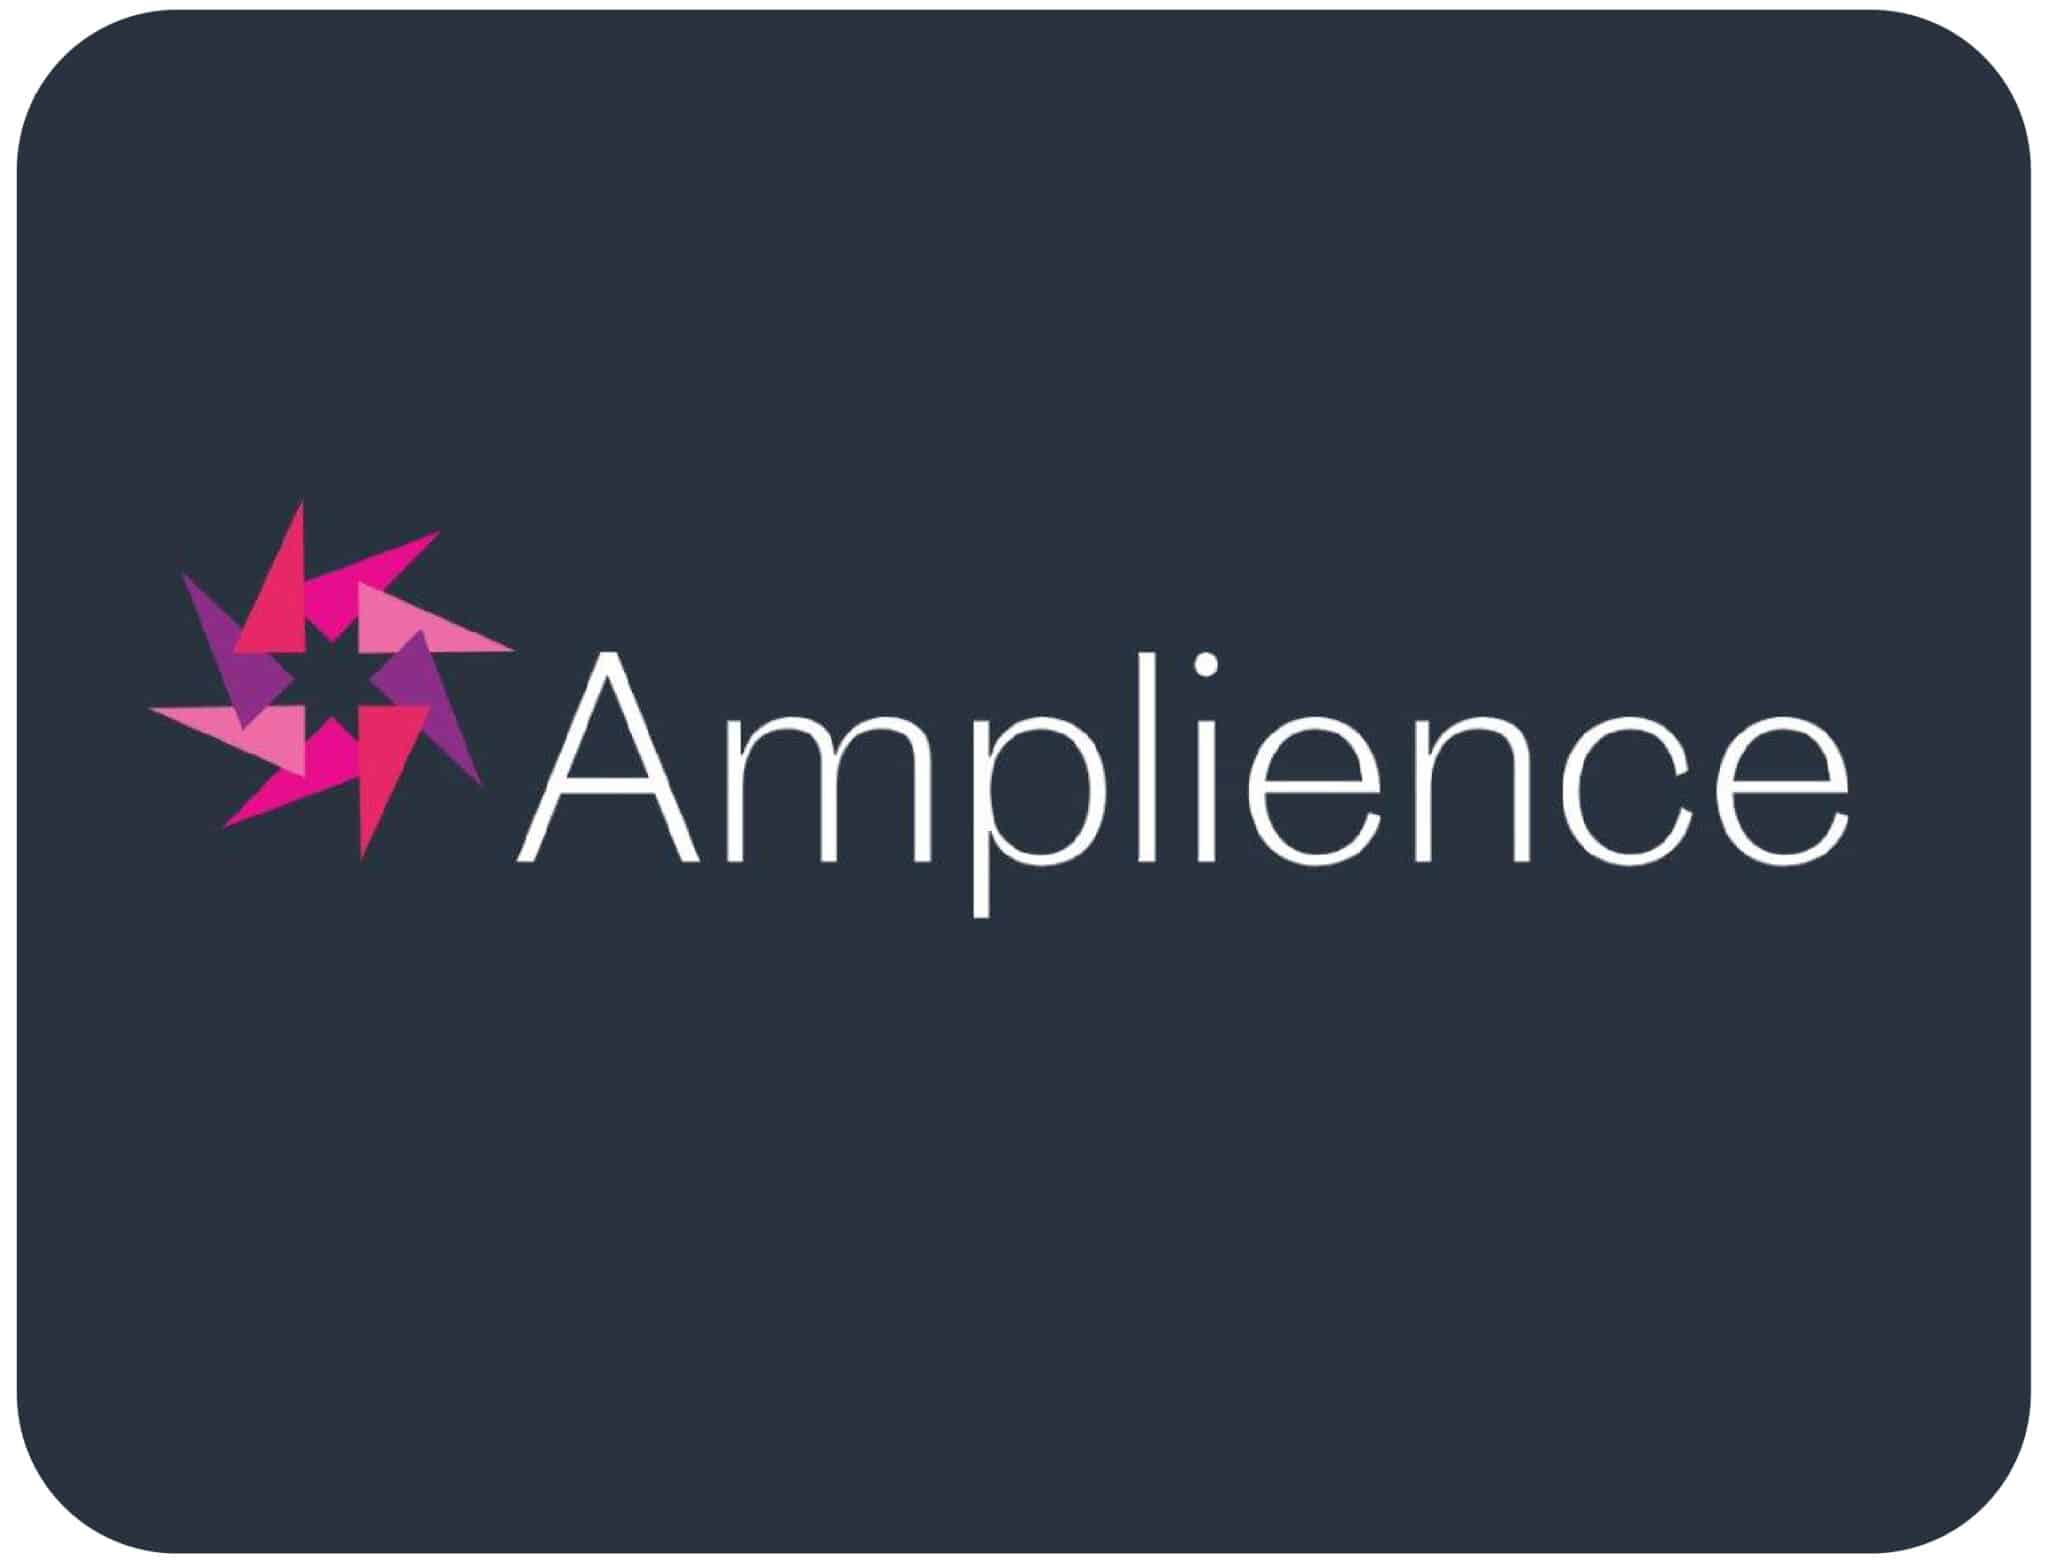 This is the Amplience logo